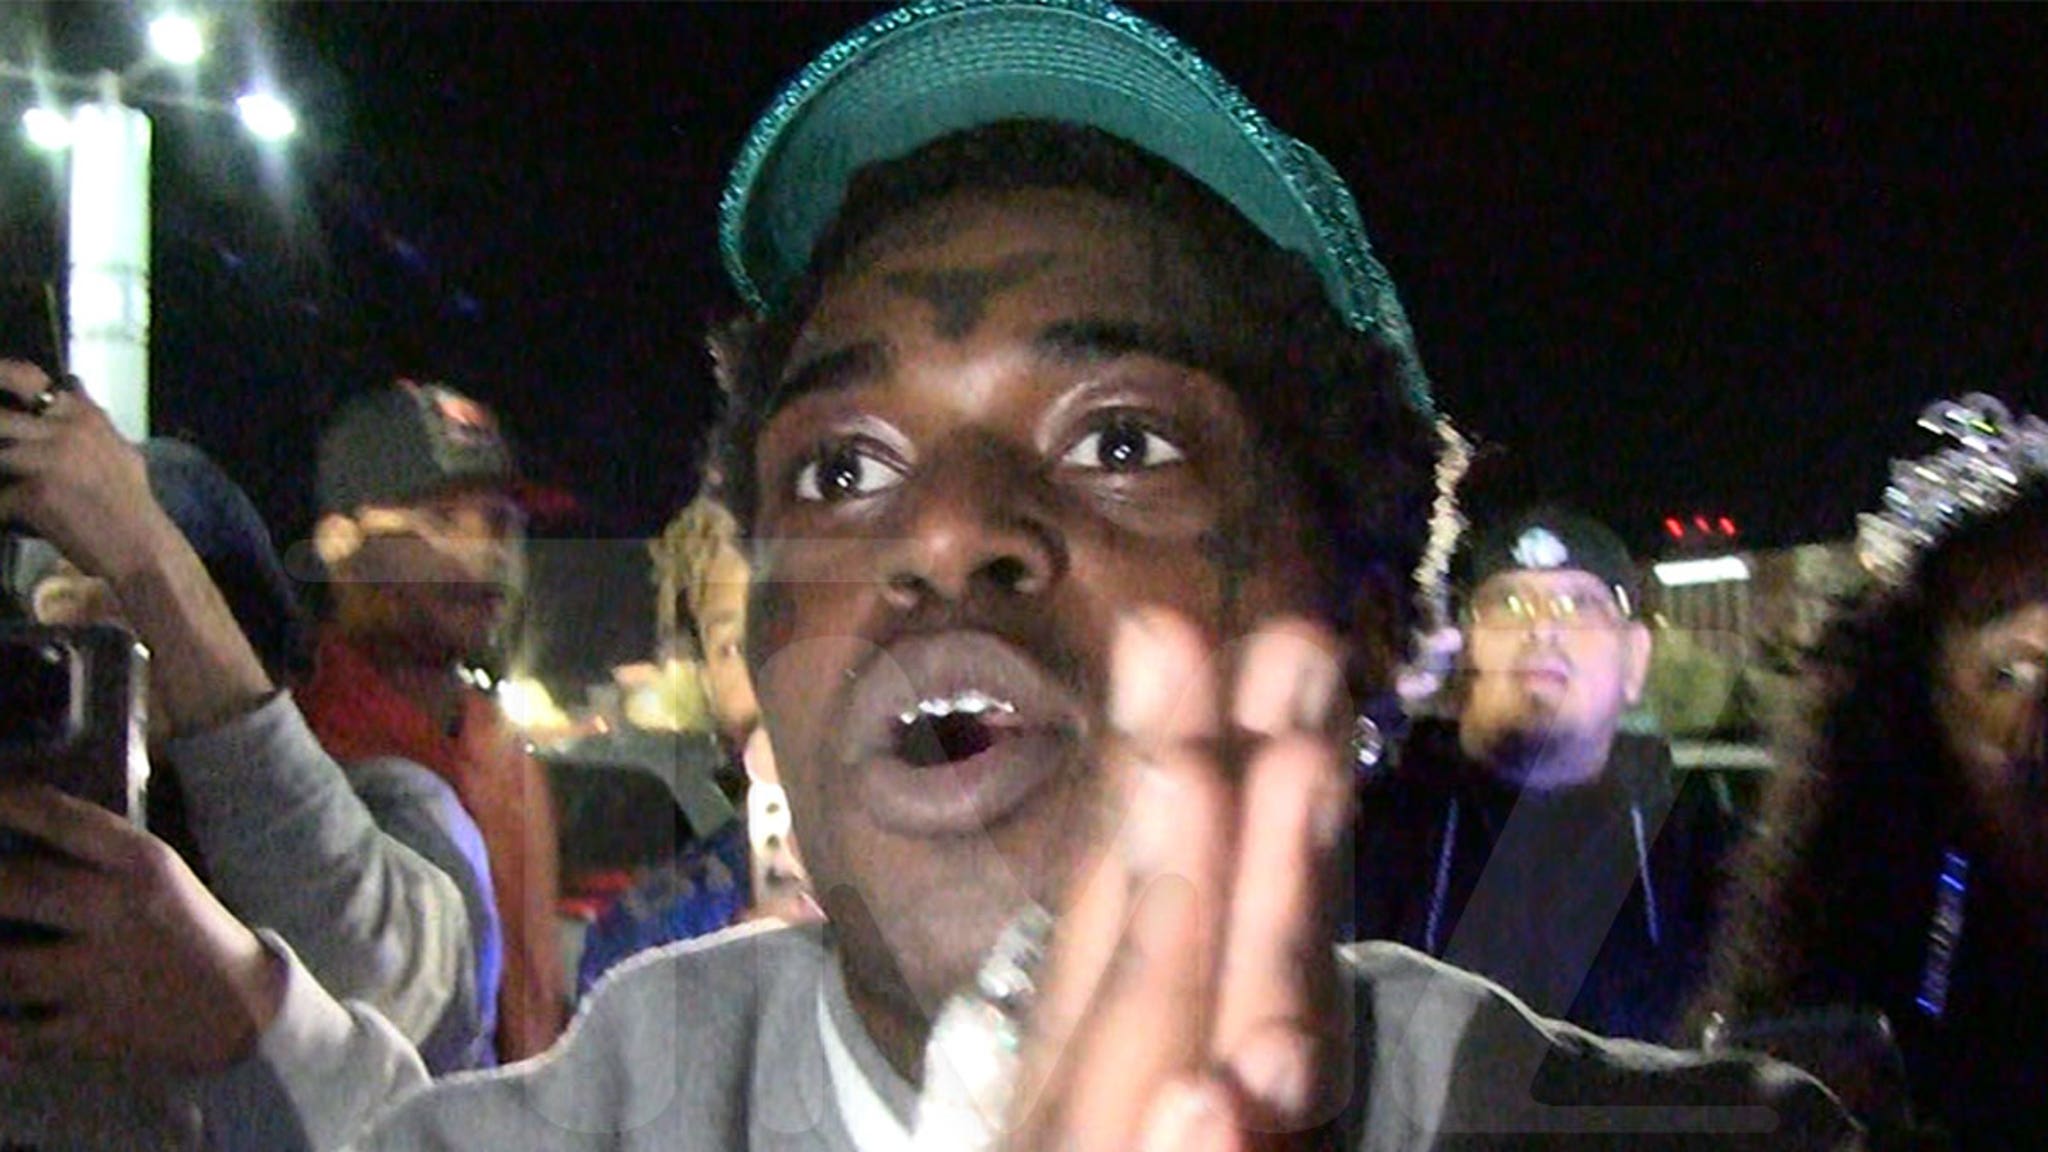 Kodak Black Plans to Wager Millions On Next Super Bowl After Losing This Year